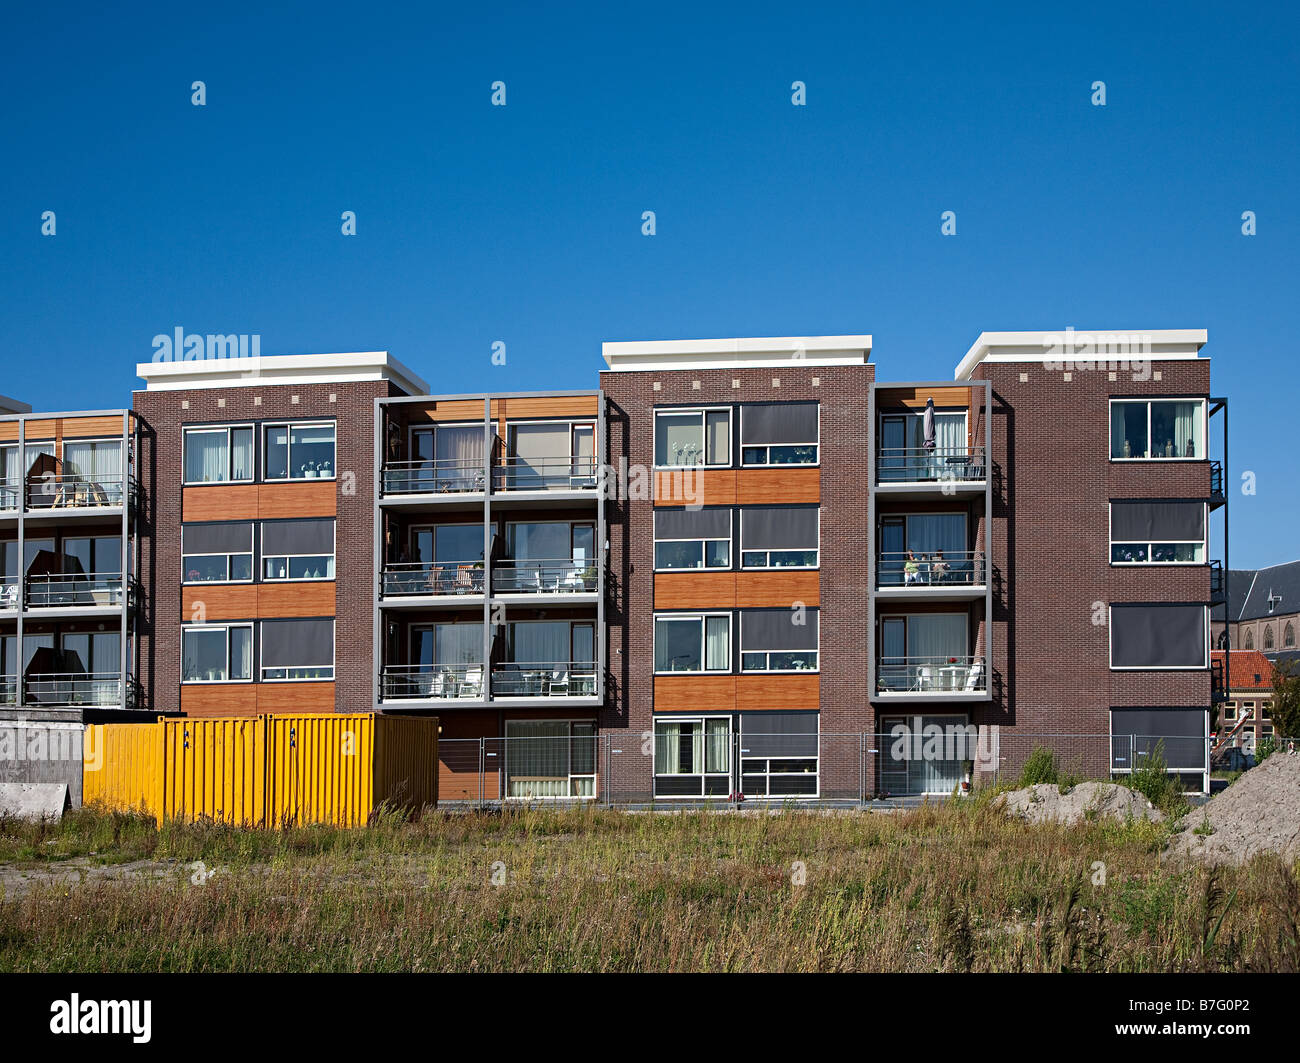 Modern block of flats with people on balcony of one Harlingen Friesland Netherlands Stock Photo